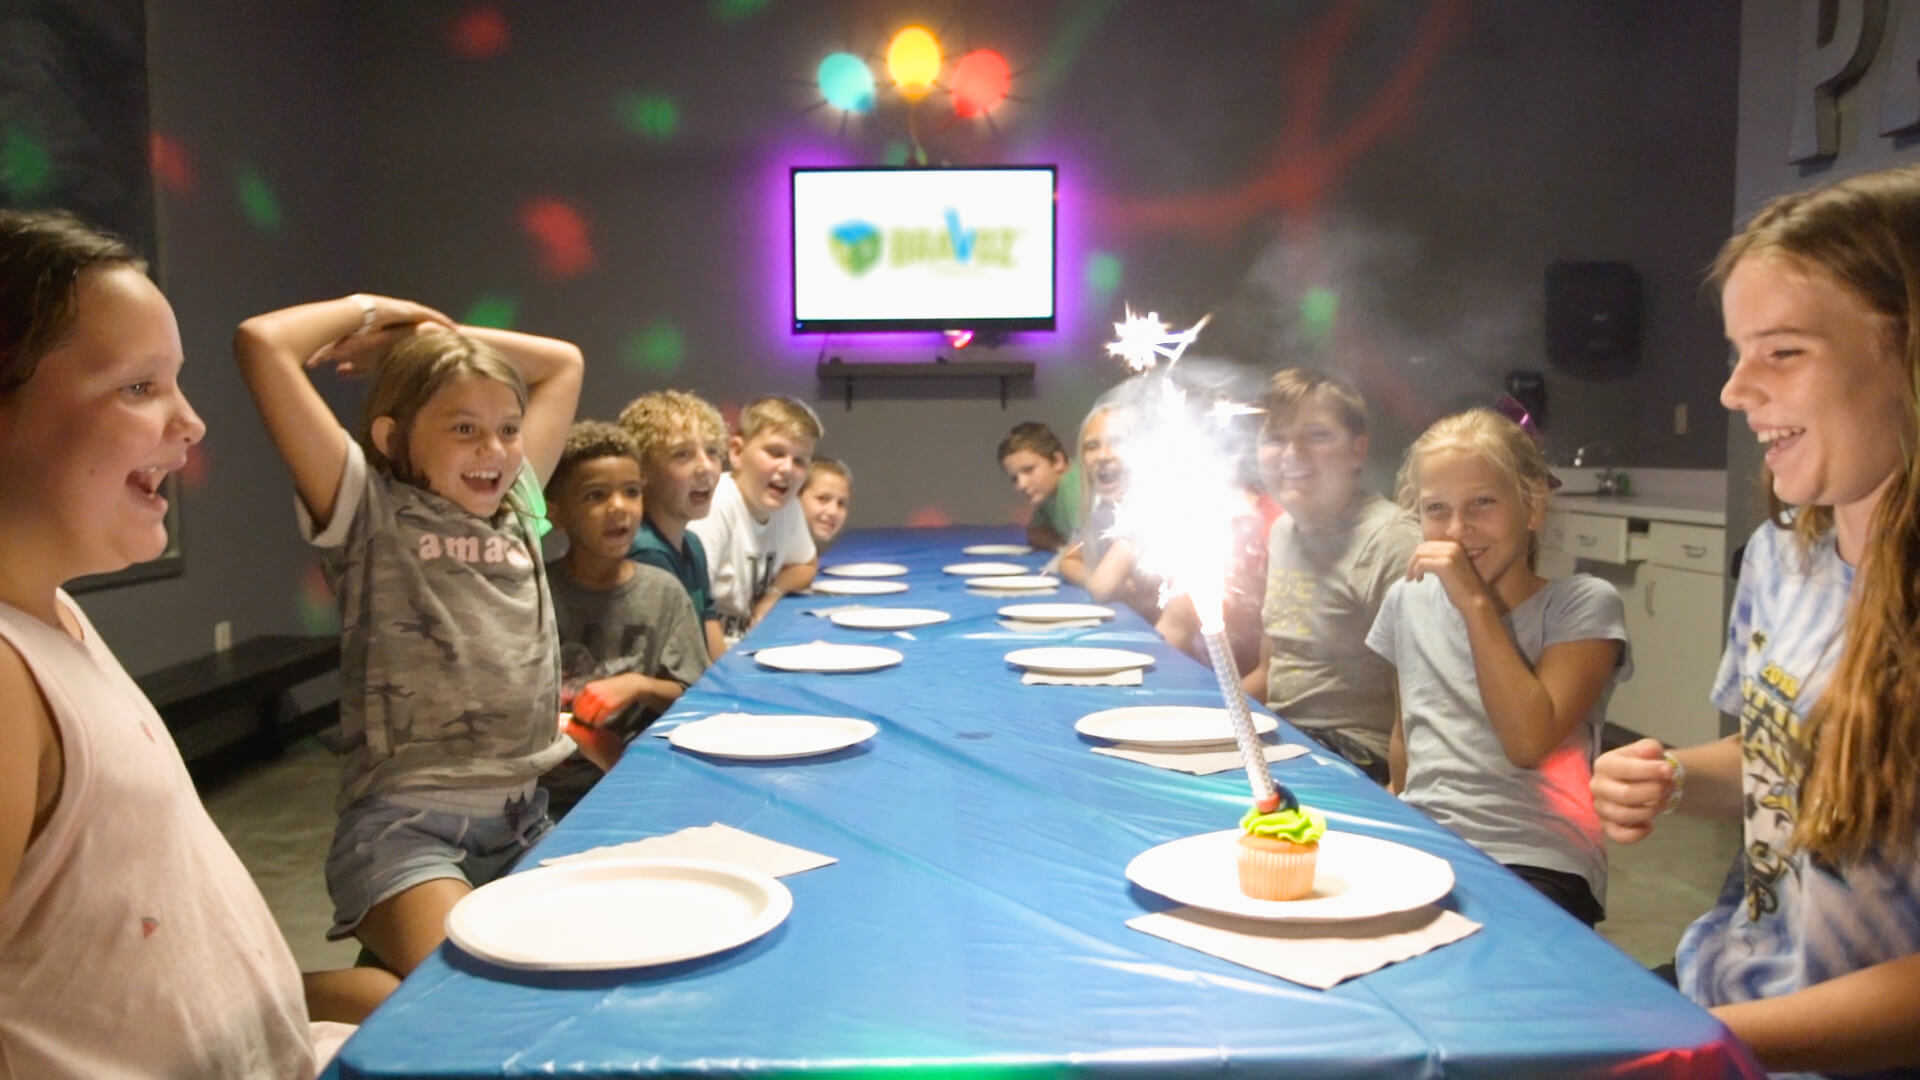 Top 4 Reasons to Host Your Child’s Next Birthday at BRAVOZ